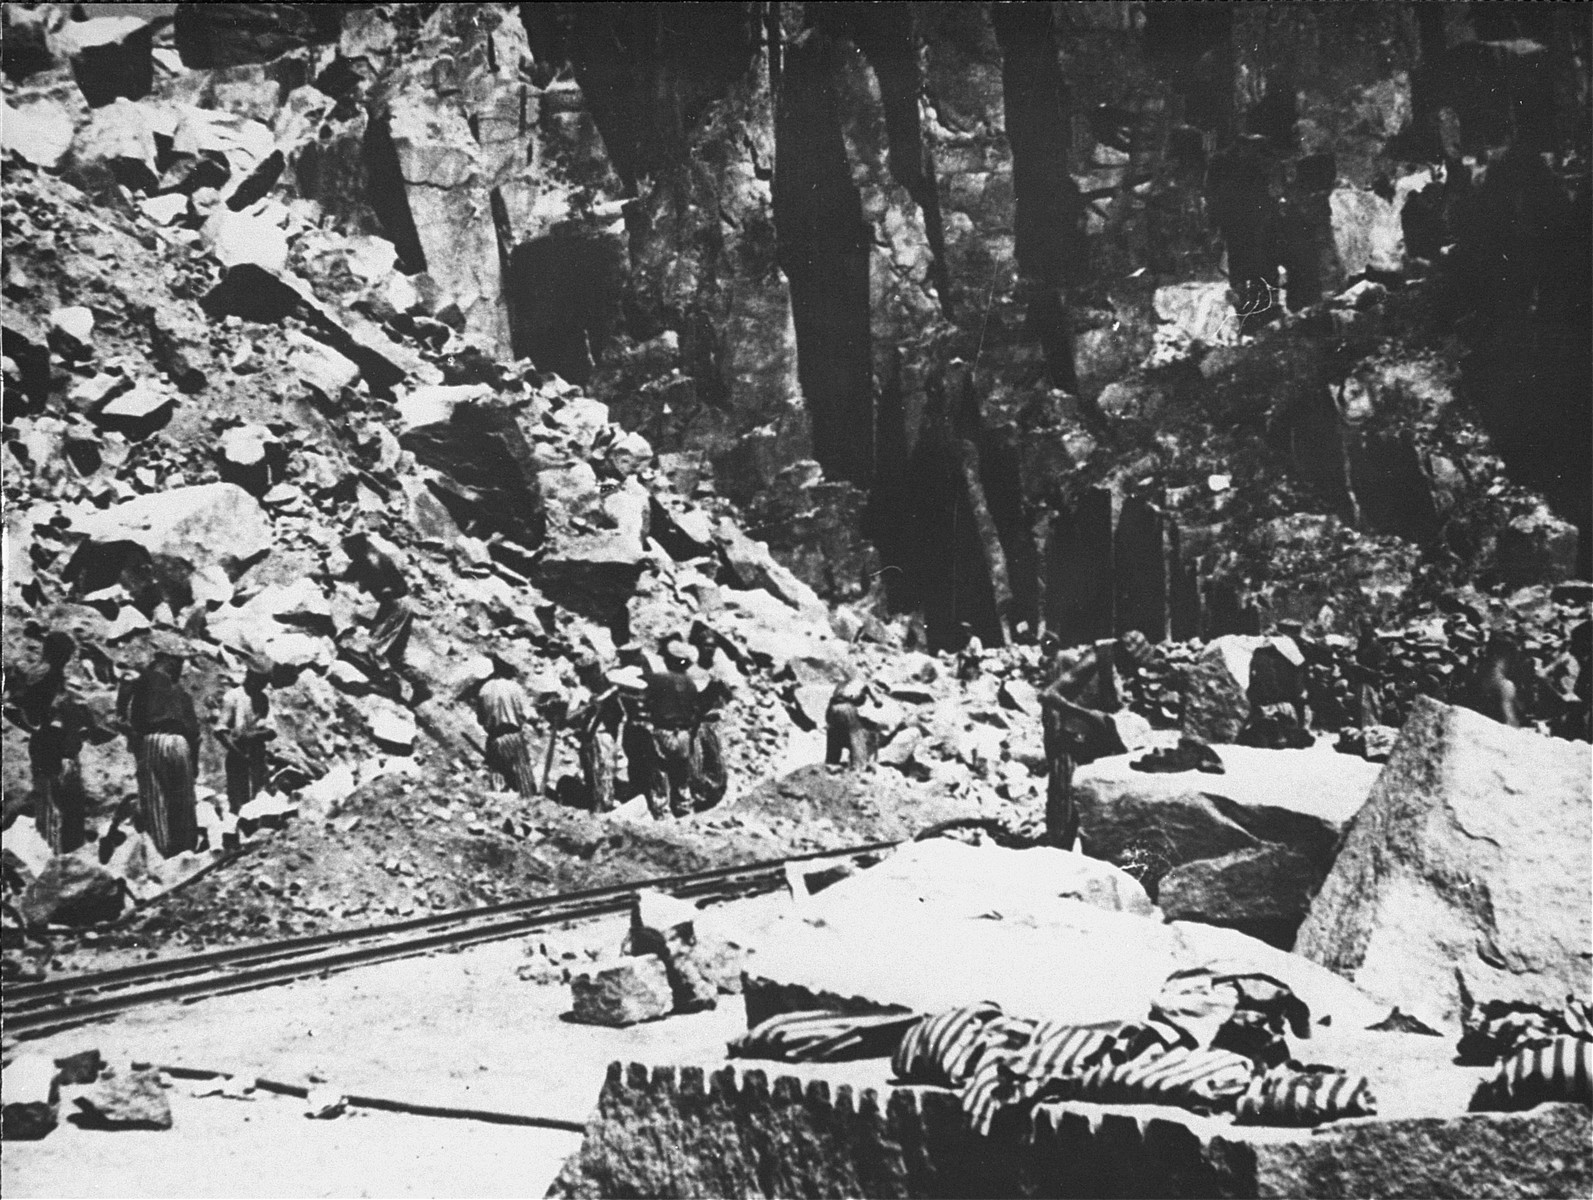 Prisoners at forced labor in the Wiener Graben quarry at the Mauthausen concentration camp.